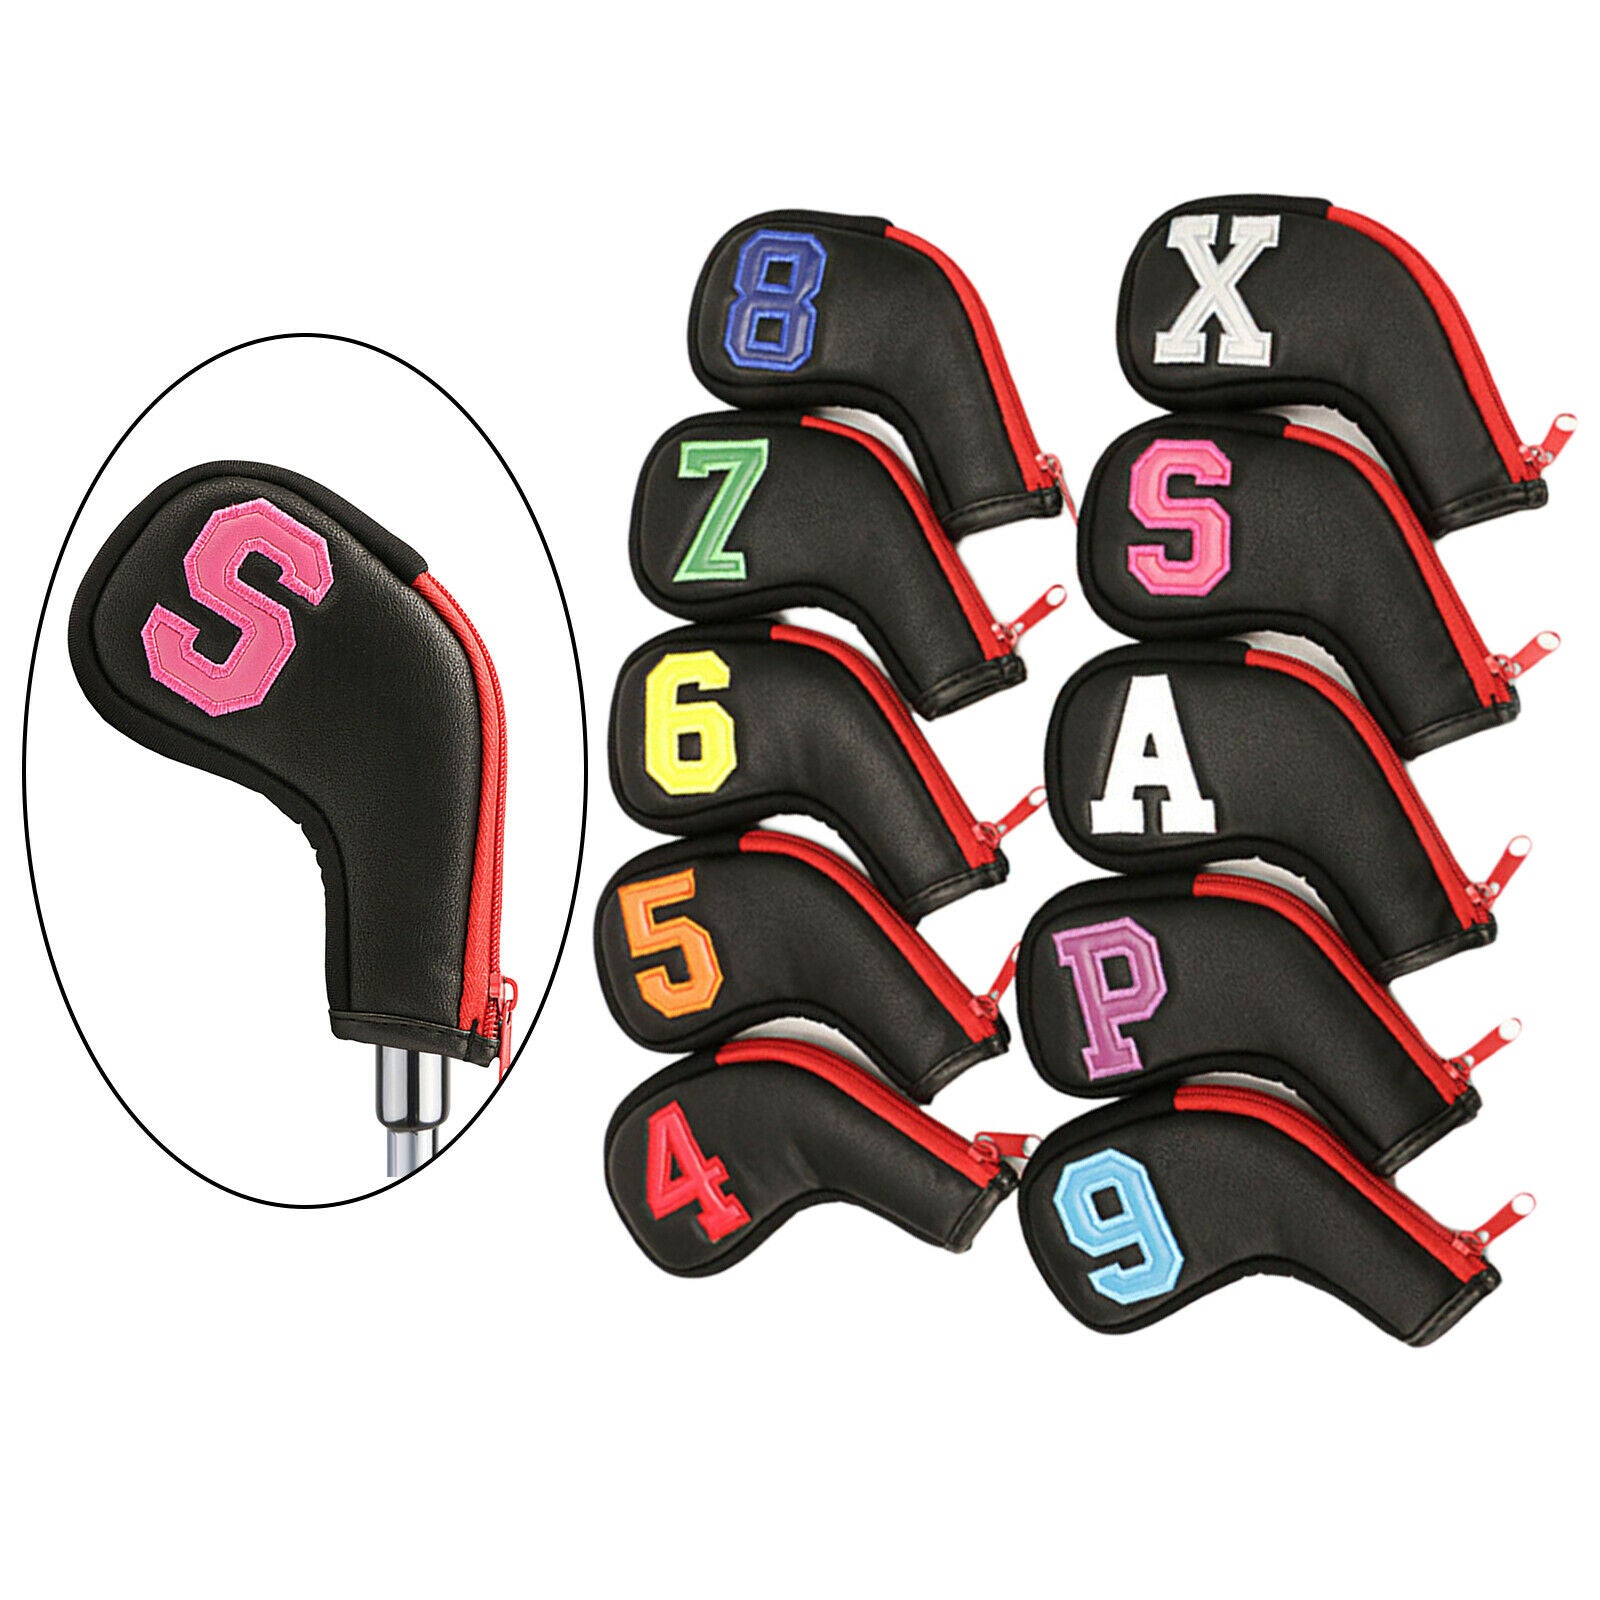 10Pcs Leather Golf Club Iron Covers 4 5 6 7 8 9 P A S X Waterproof HeadCover